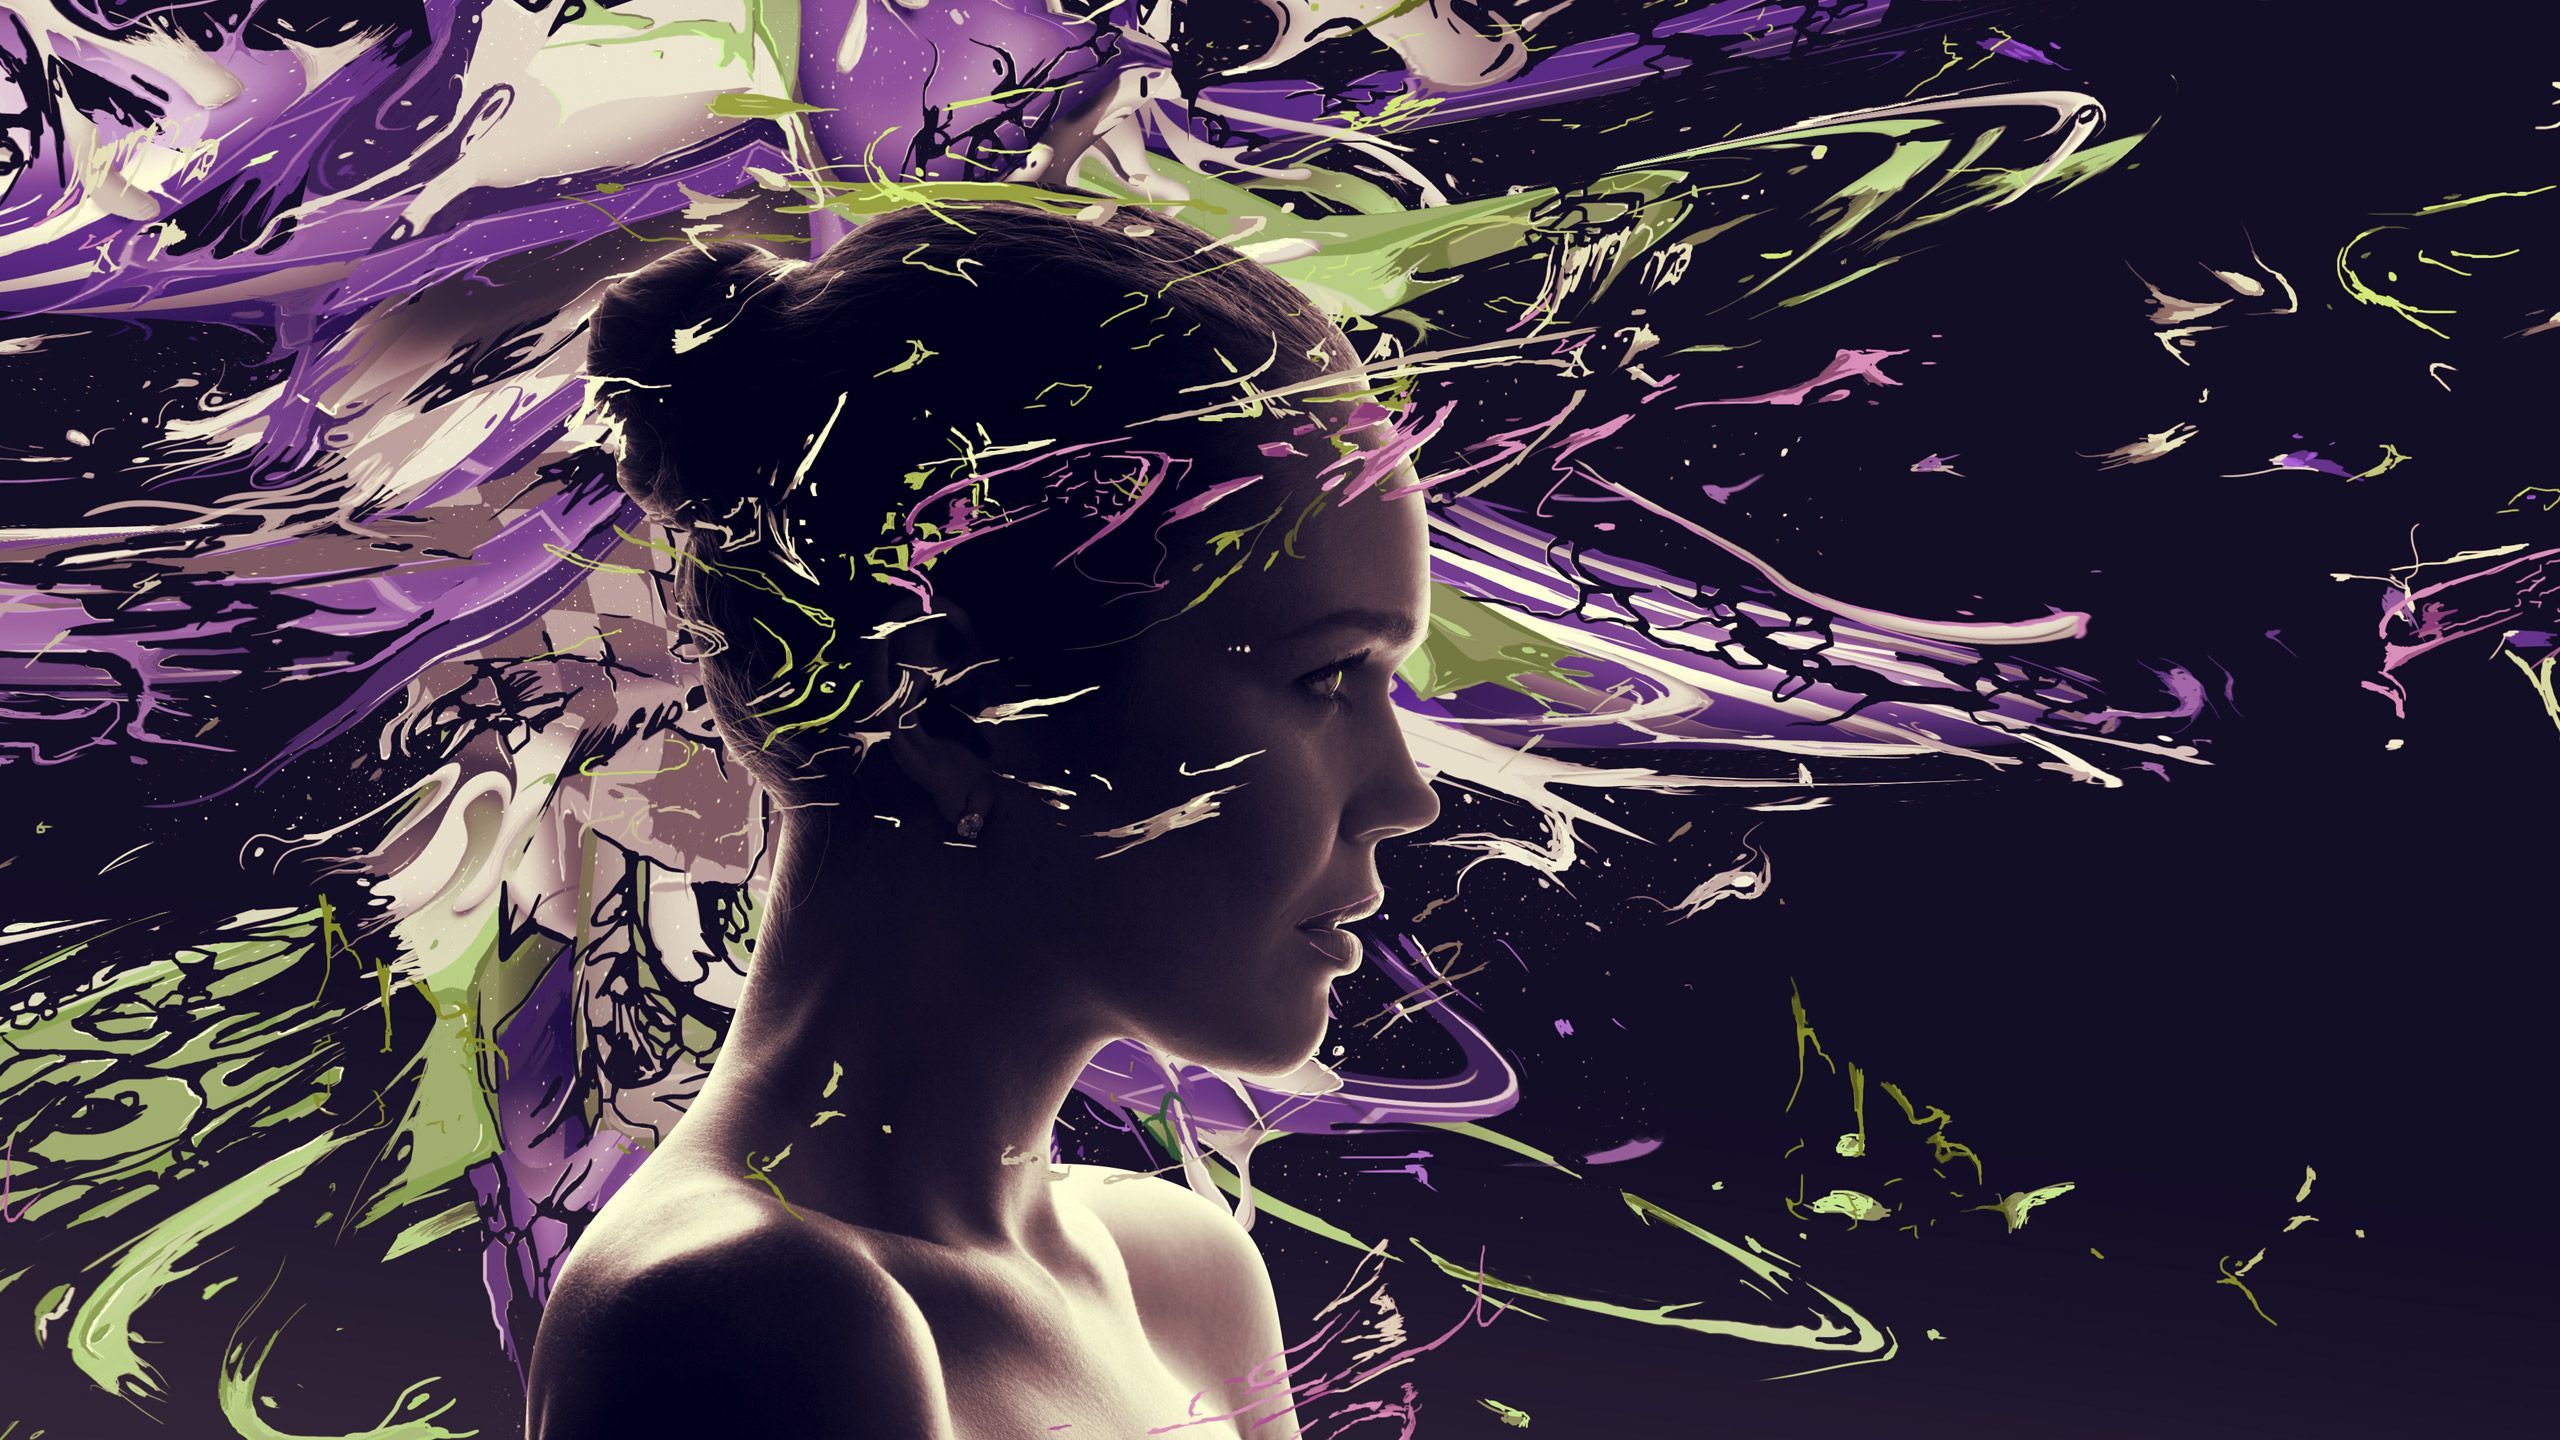 3D Cgi Psychedelic Girl Wallpapers